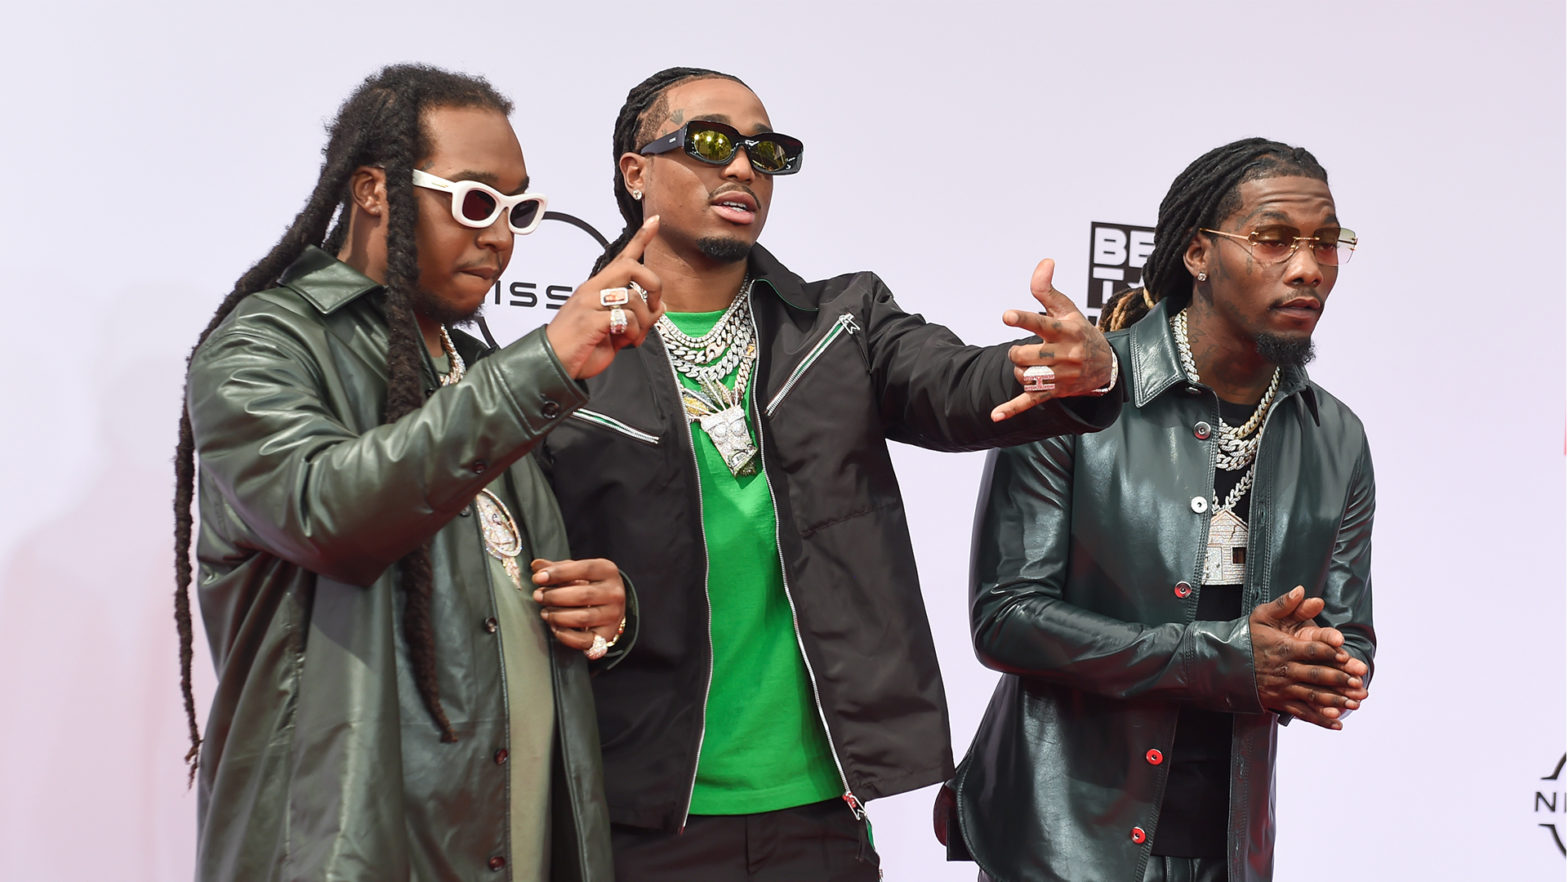 Jim Jones, Migos Aim To Set The Trends With A New NFT Music Video Dropping In The Metaverse